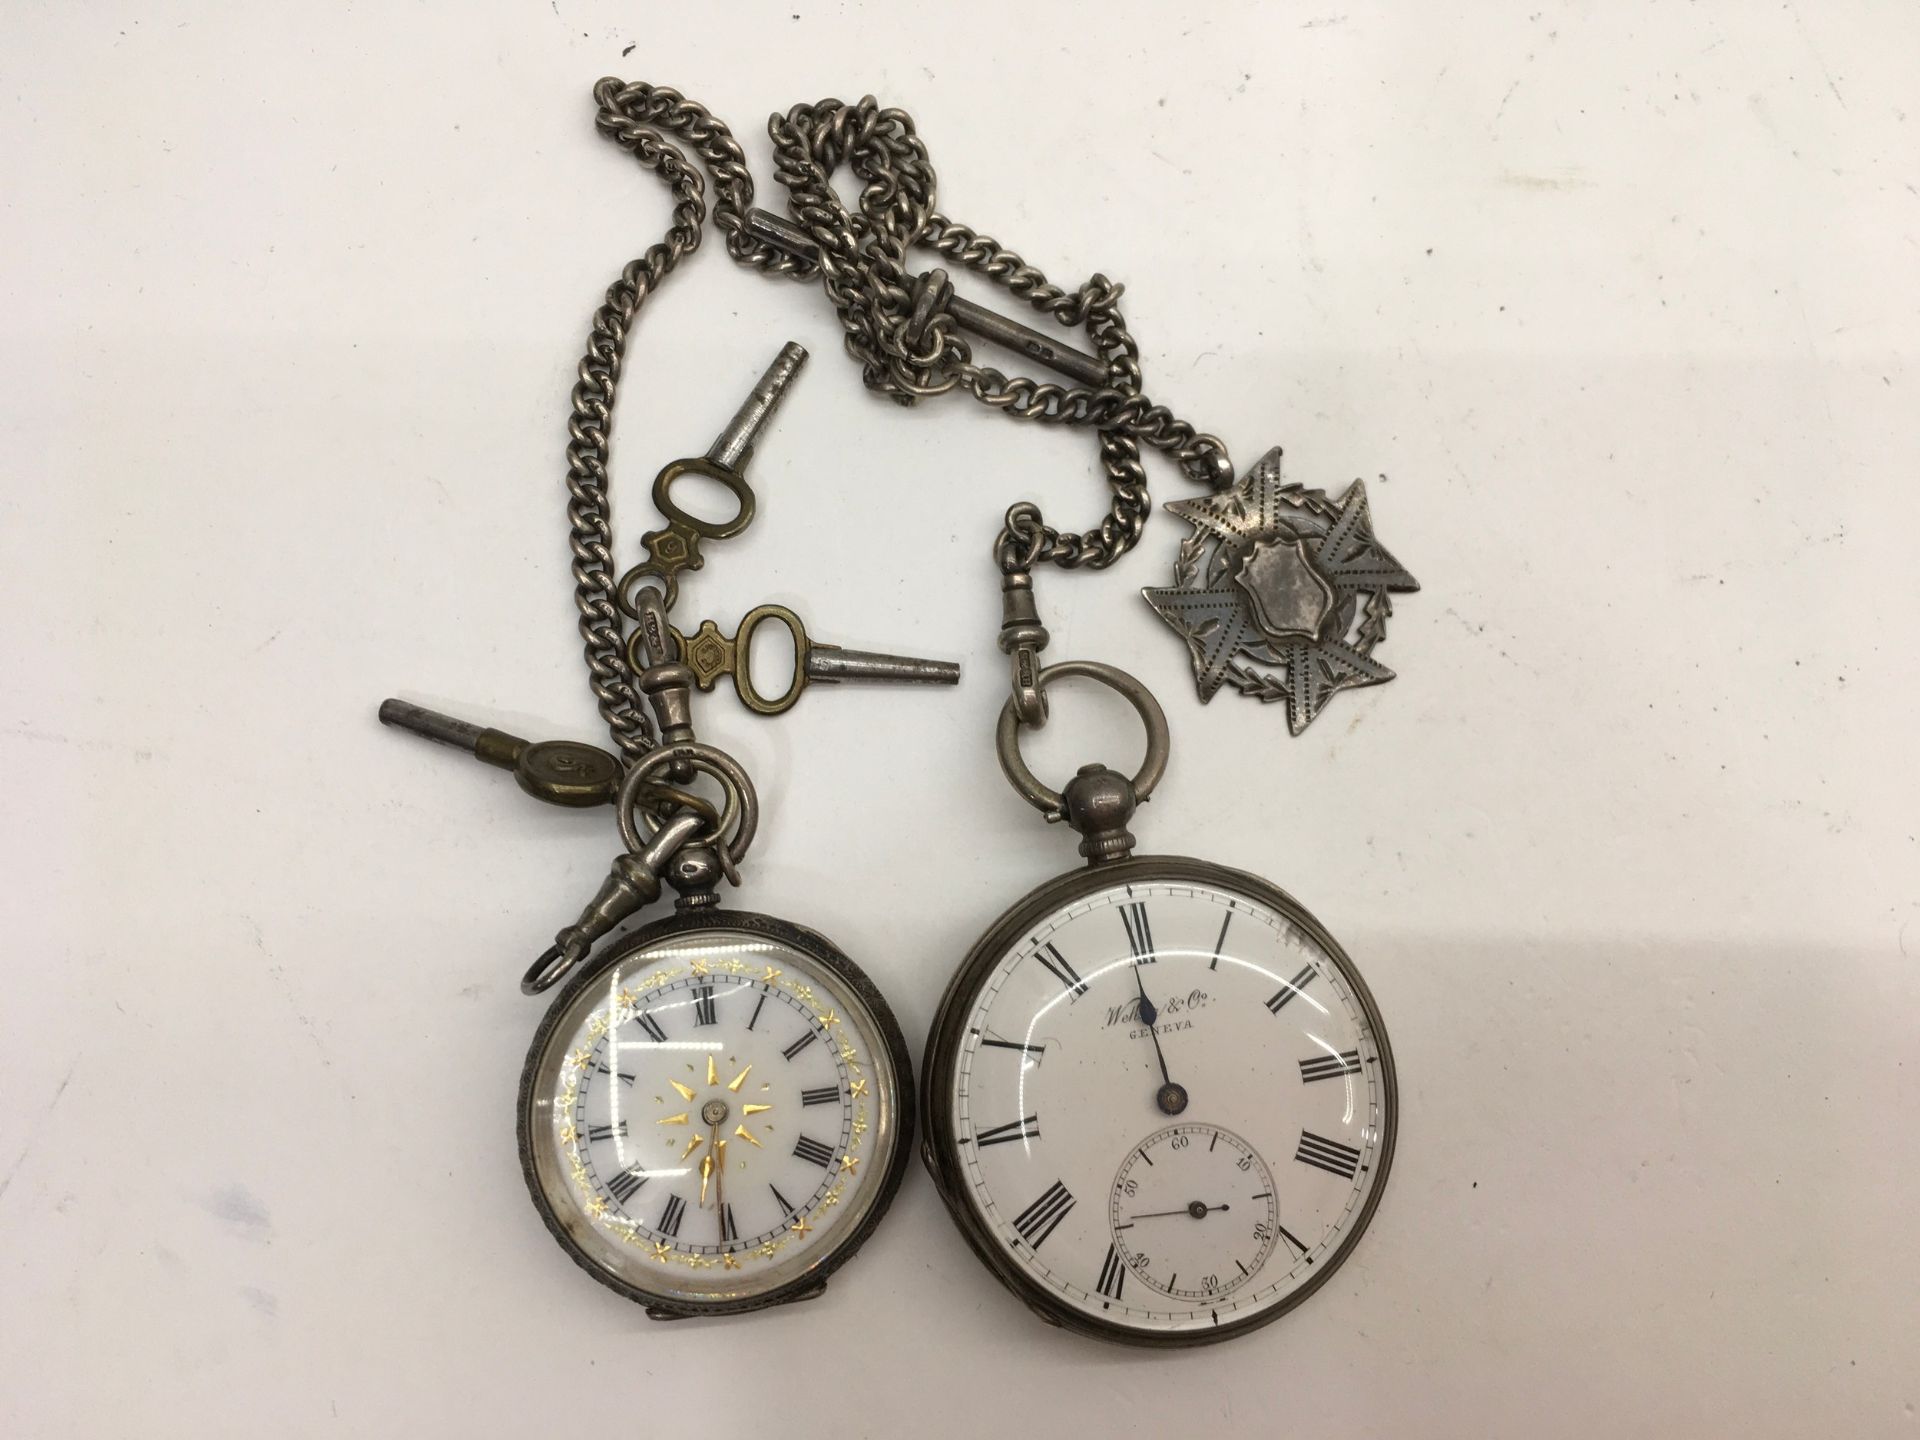 2 x silver pocket watches watch chain and fob